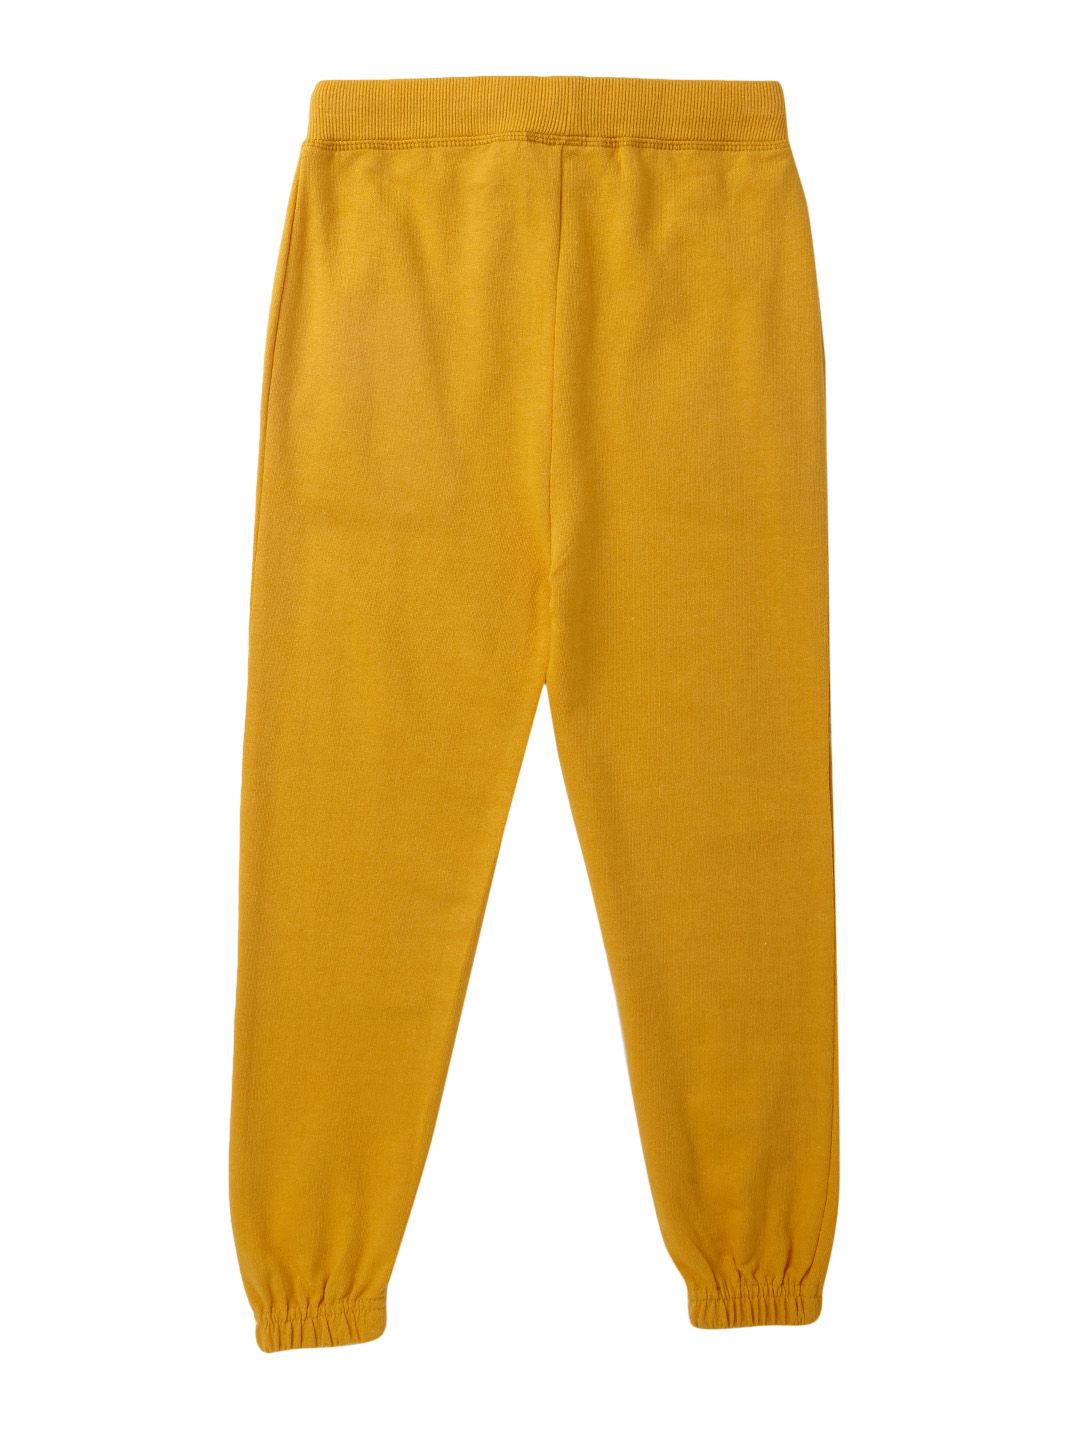 ChildrensalonOutlet - TARTINE ET CHOCOLAT BOYS YELLOW CORDUROY TROUSERS  Mustard yellow trousers for younger boys from Tartine et Chocolate. Made in  soft cotton corduroy, they have pockets on the front and back,